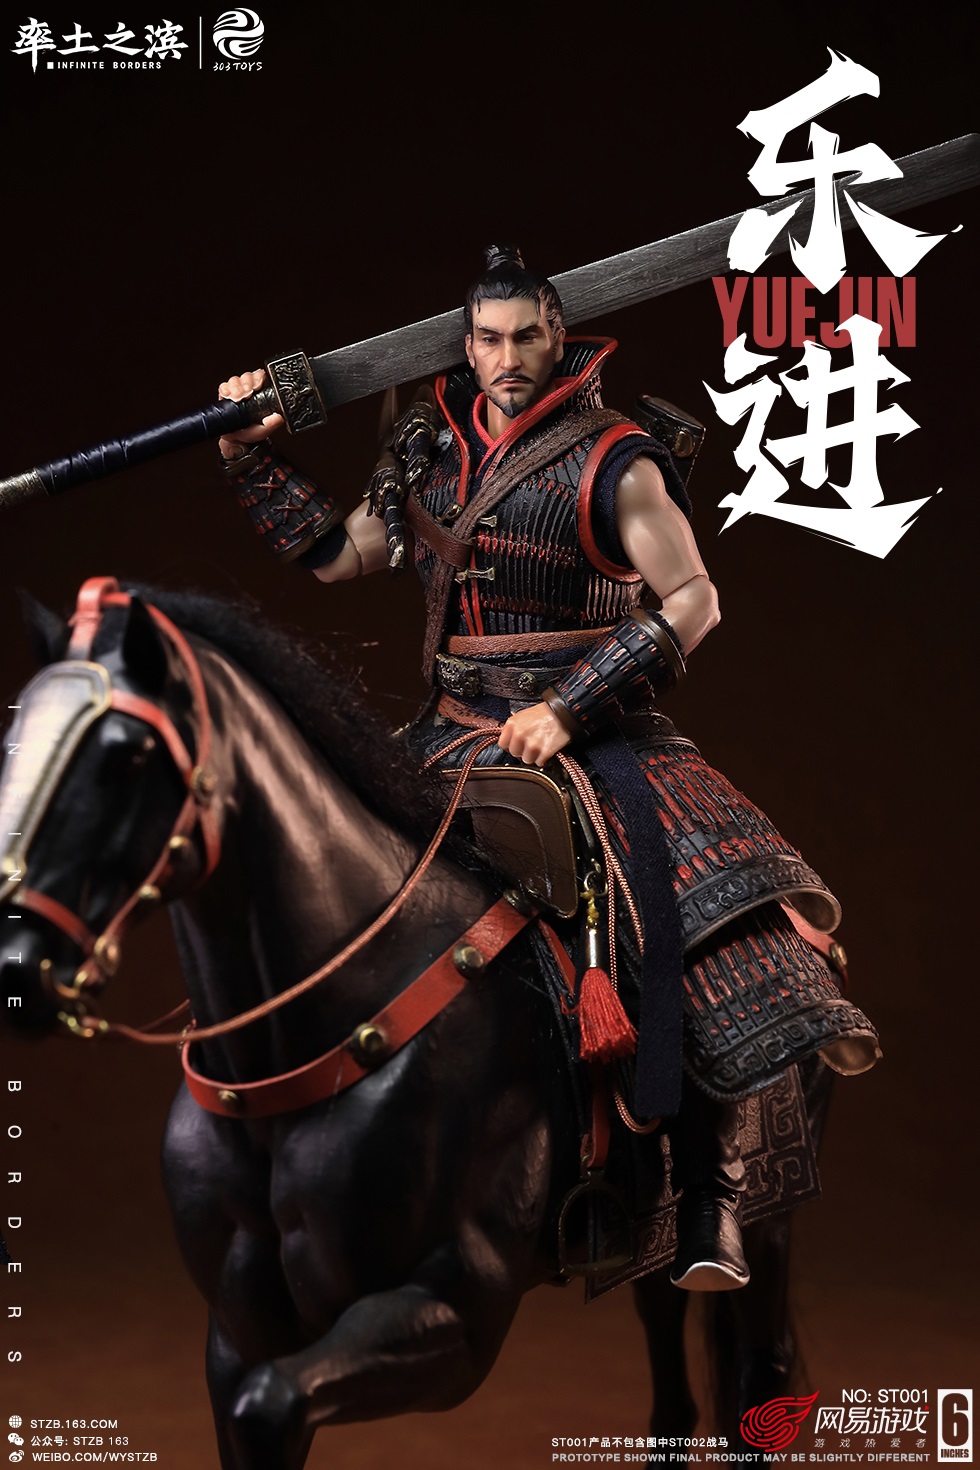 NEW PRODUCT: INFINITE BORDERS X 303TOYS 1/12 - The Five Sons of Elite Generals: Yue Jin ST001 04166